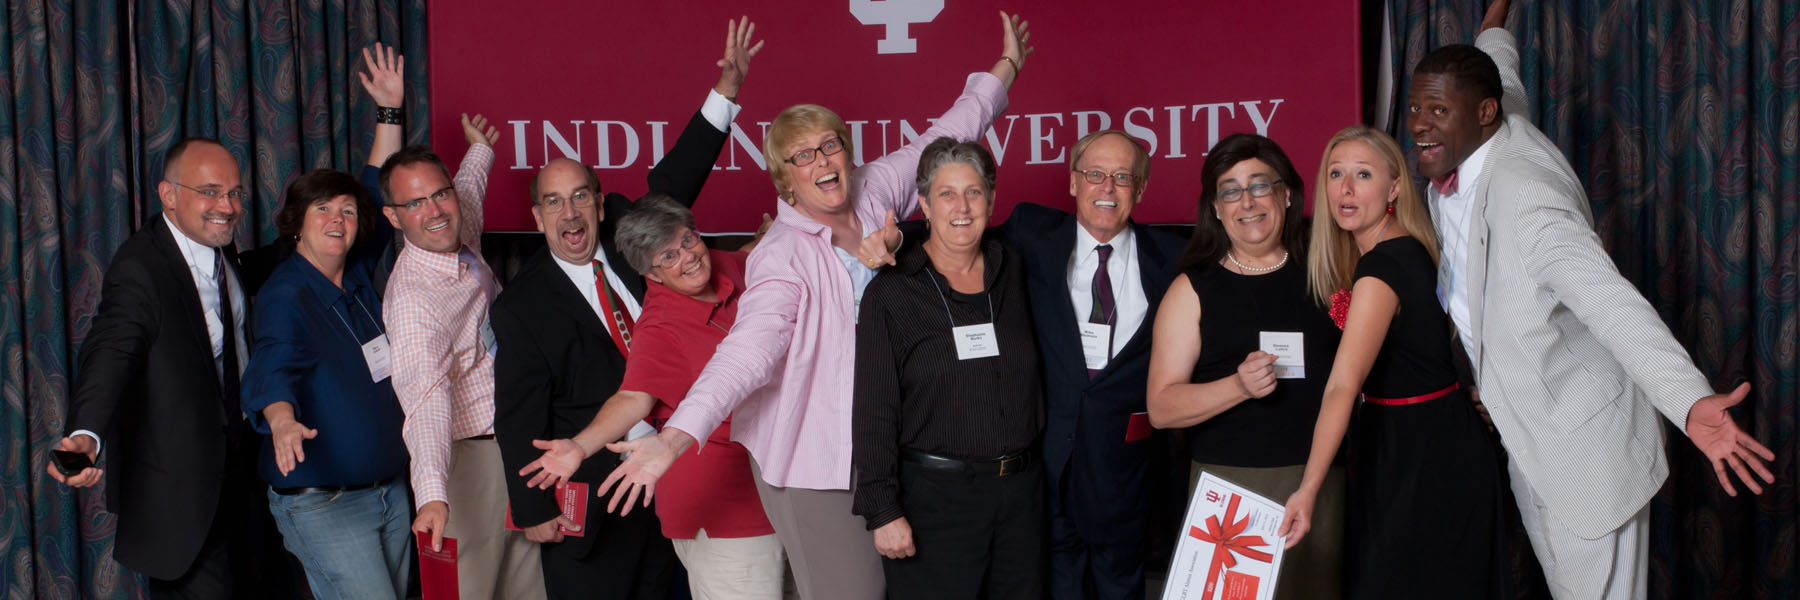 Group of smiling people pose in front of an IU banner.